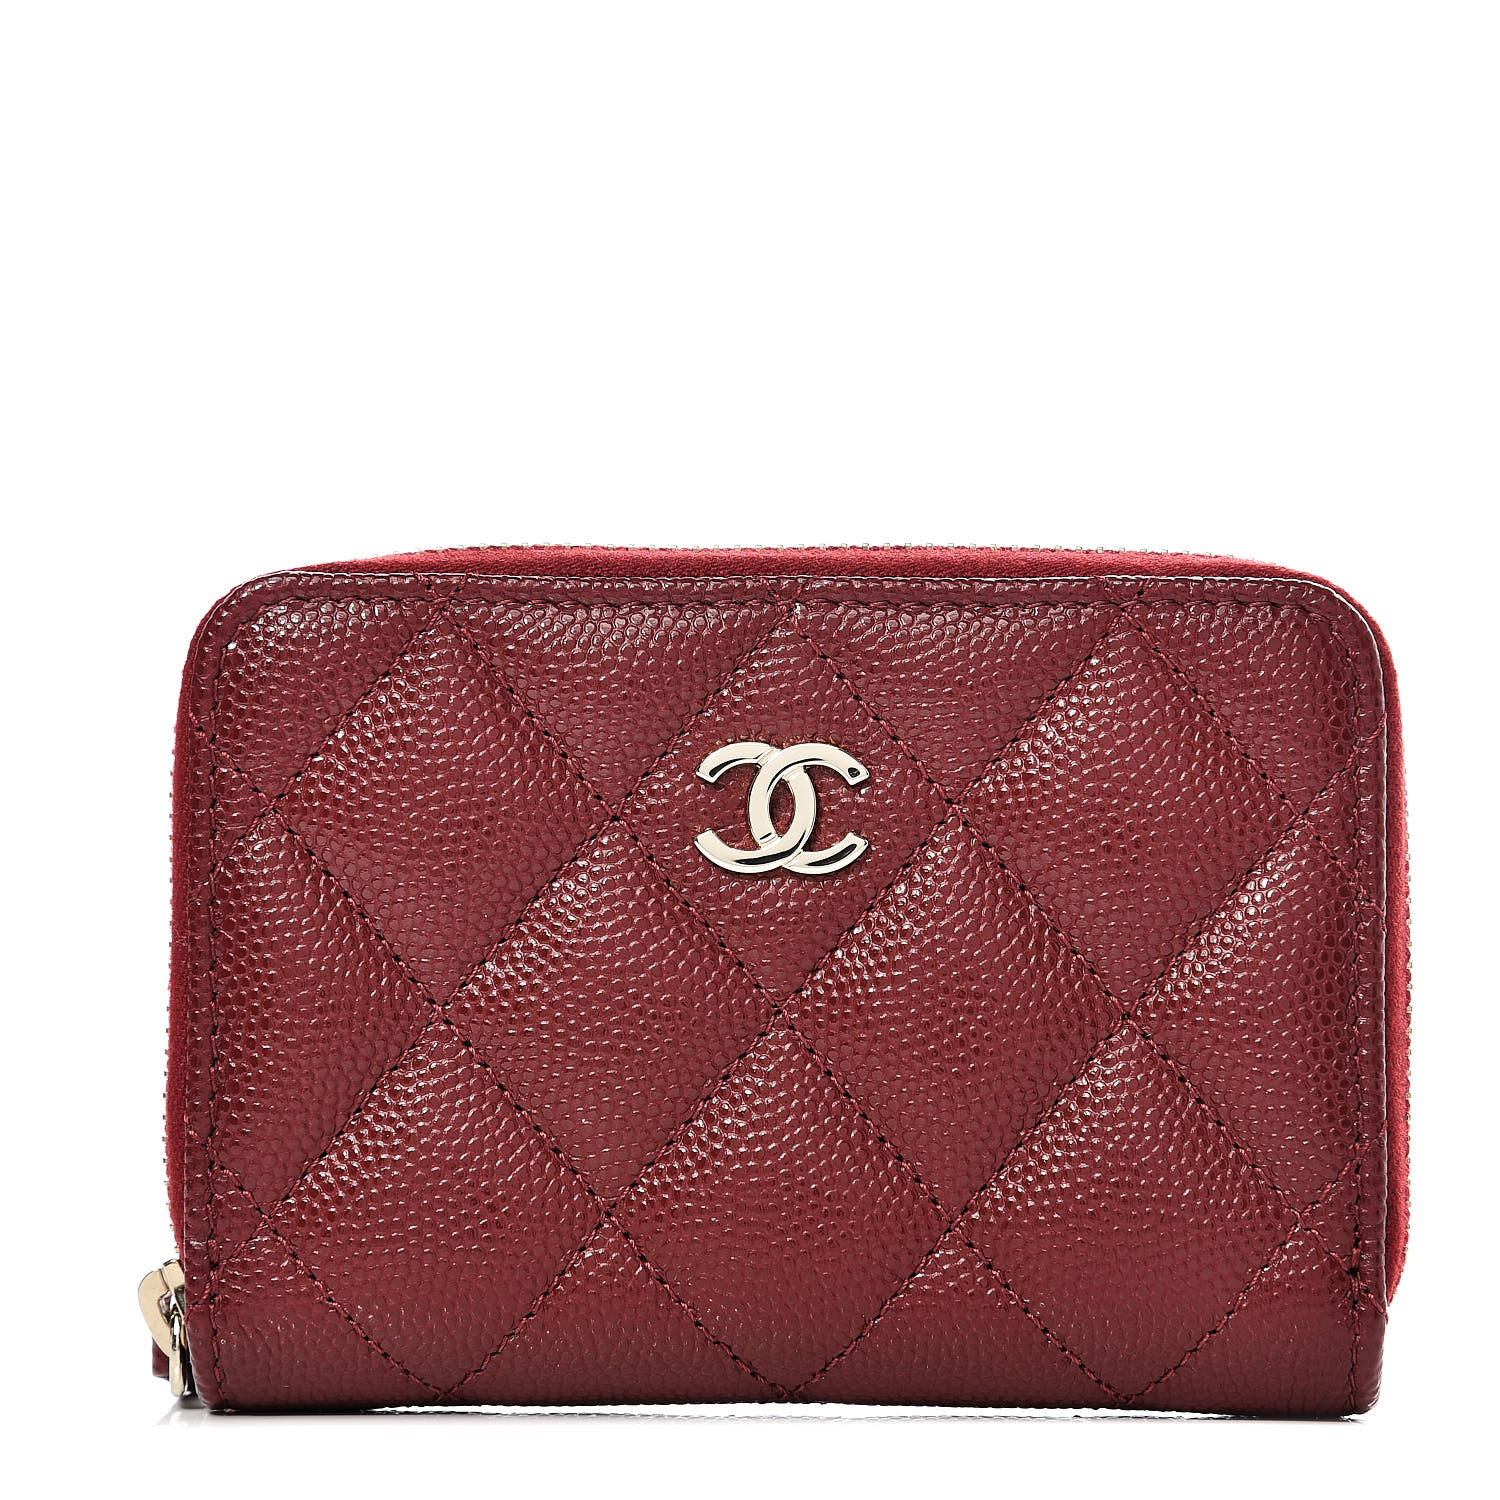 CHANEL Iridescent Caviar Quilted Zip Card Holder Burgundy 523073 